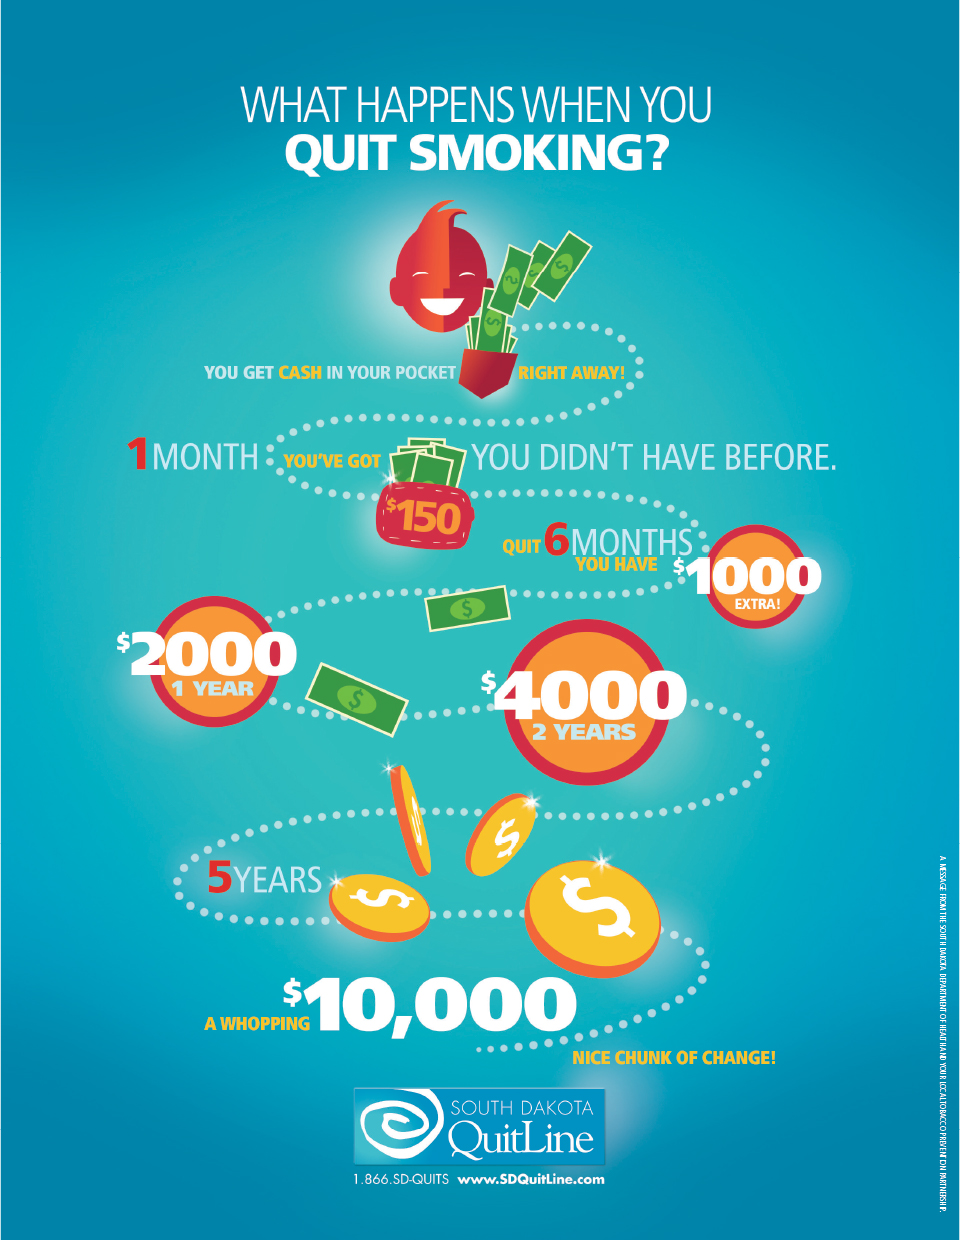 What Happens When You Quit Smoking – Financial